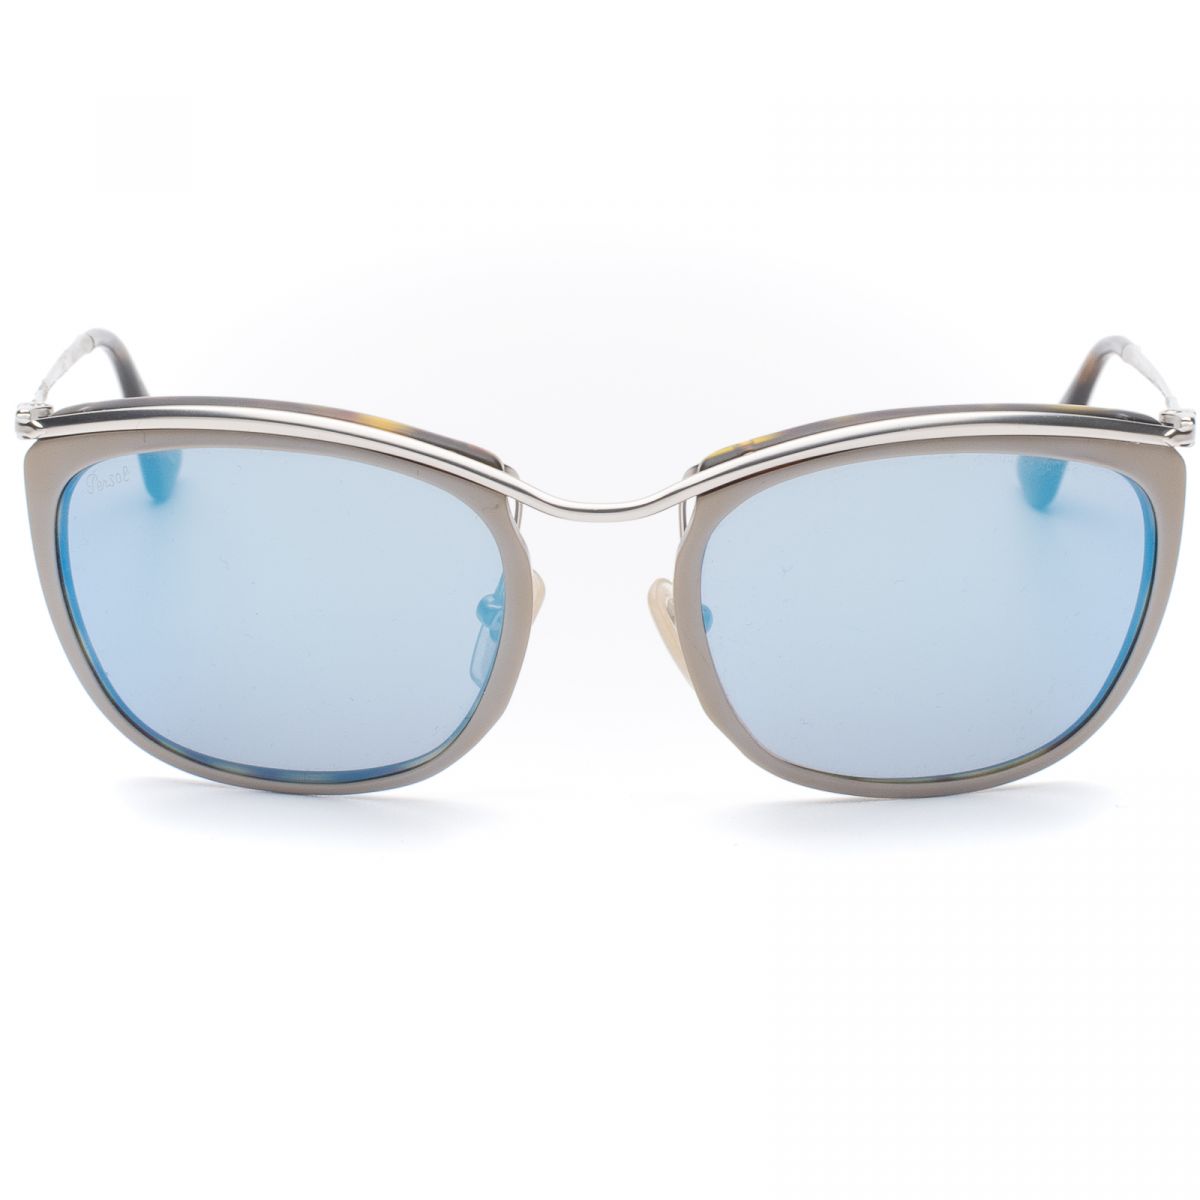 PERSOL 3081S/100817/52